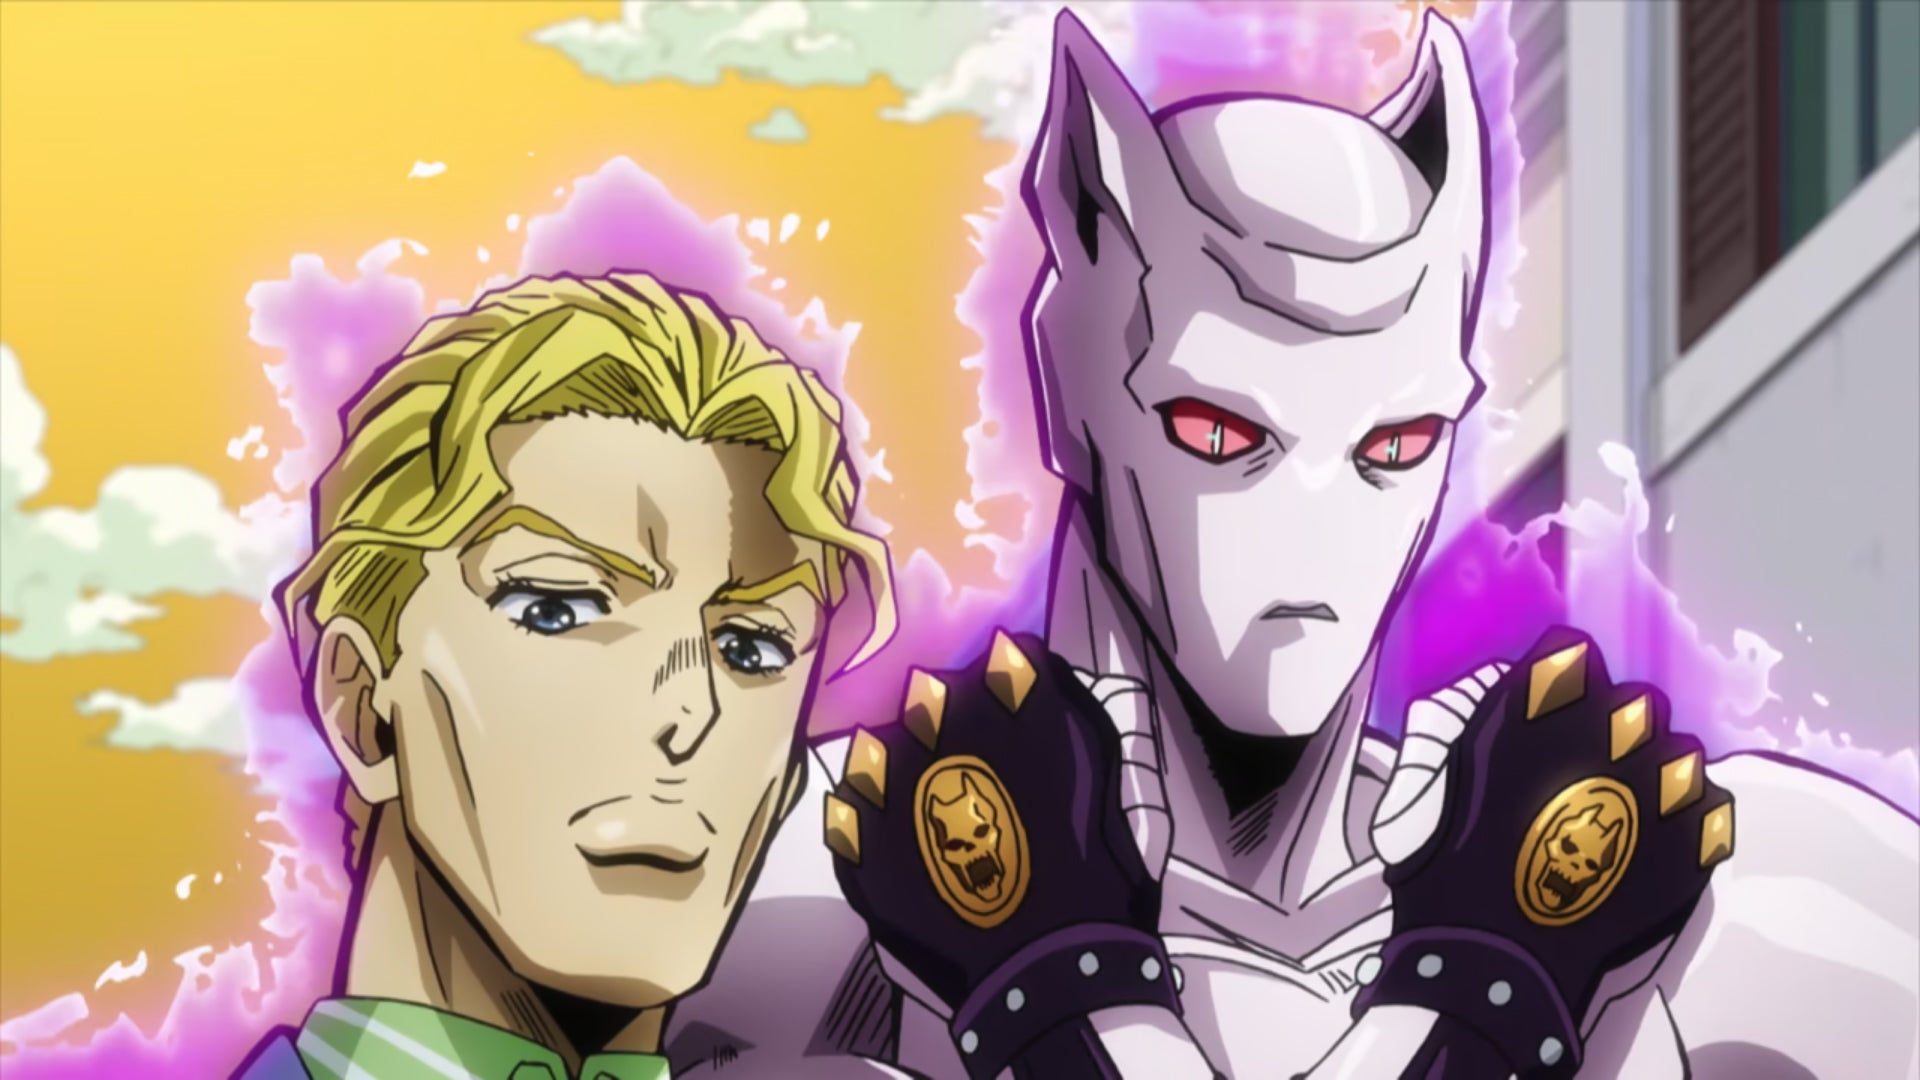 Yoshiage Kira and his Stand, Killer Queen.